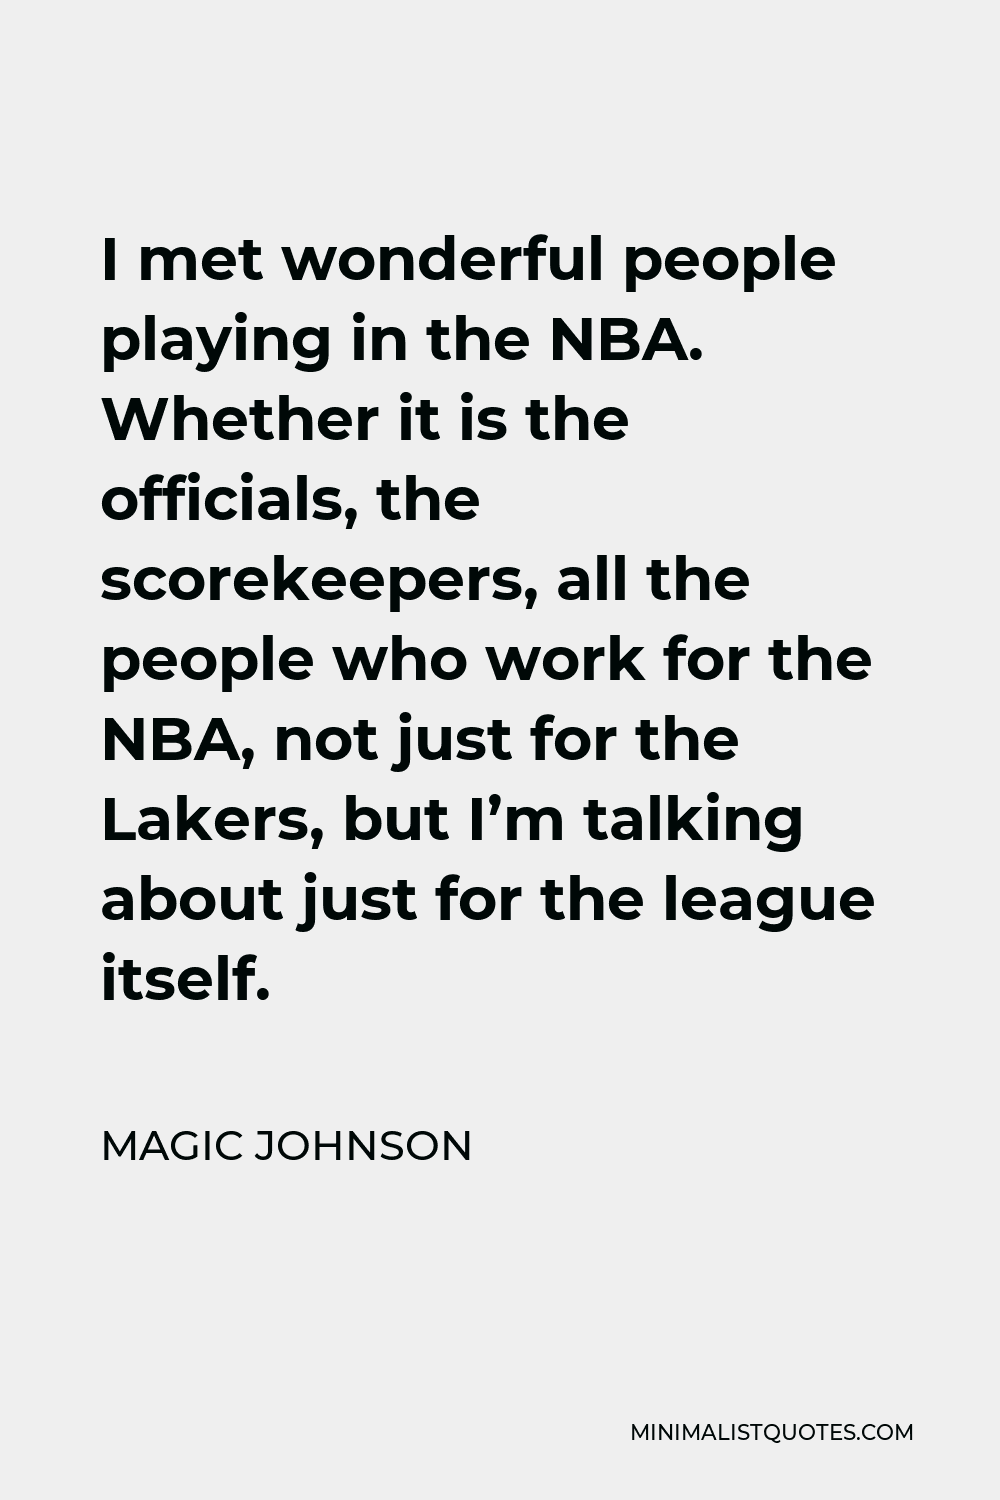 Magic Johnson Quote - I met wonderful people playing in the NBA. Whether it is the officials, the scorekeepers, all the people who work for the NBA, not just for the Lakers, but I’m talking about just for the league itself.